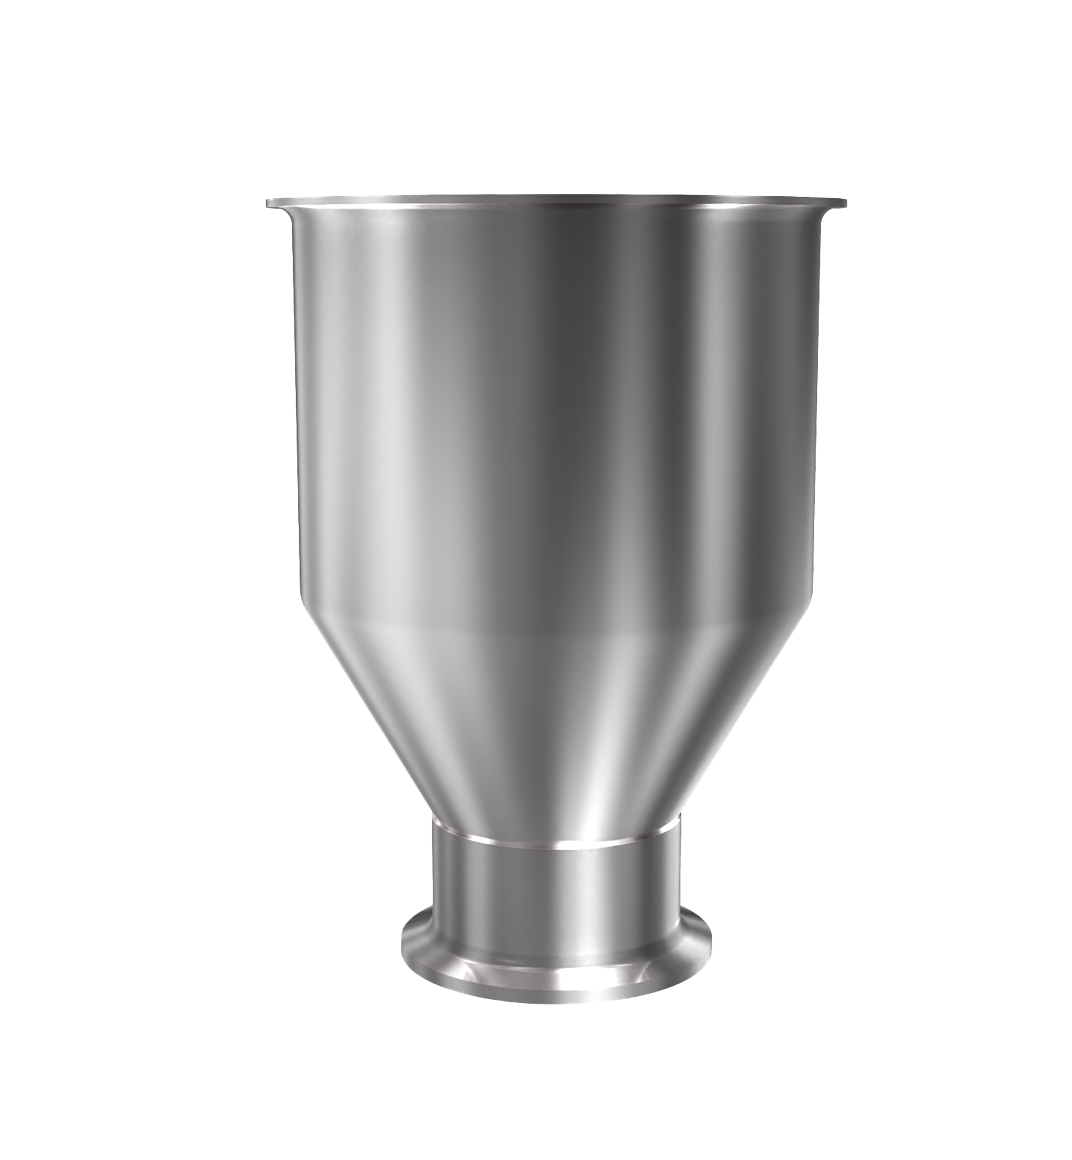 304 Stainless Steel funnel with 2" sanitary fitting 0.2 gallons, 5.94" ID x 6 OAH